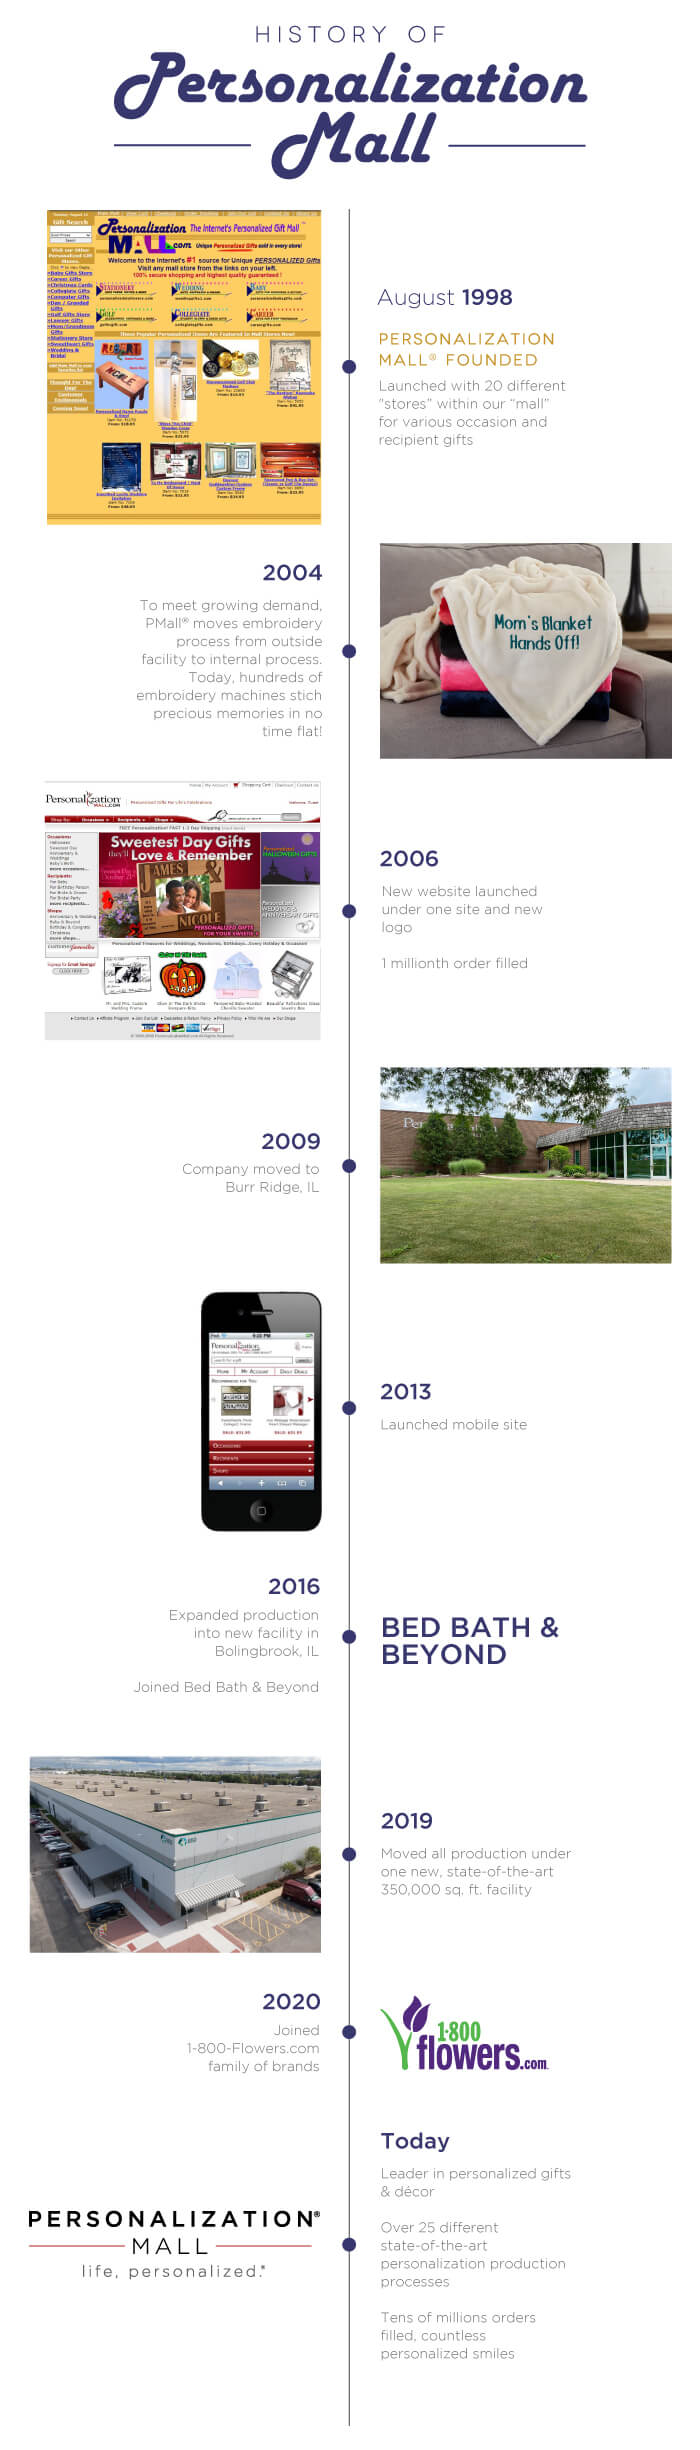 History of Personalization Mall - 23 Year Timeline